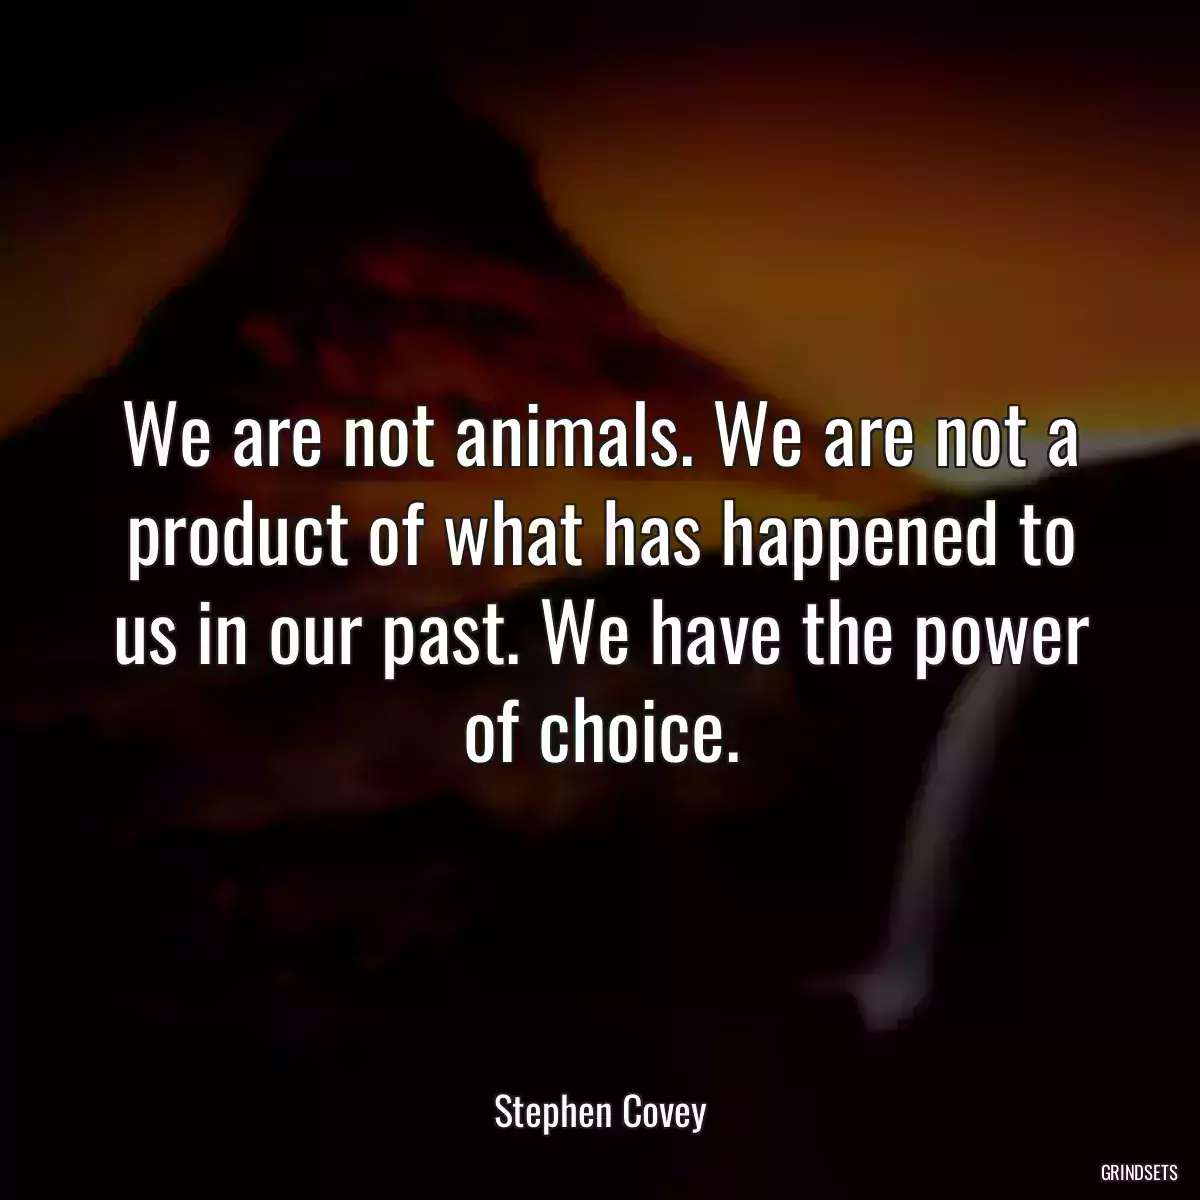 We are not animals. We are not a product of what has happened to us in our past. We have the power of choice.